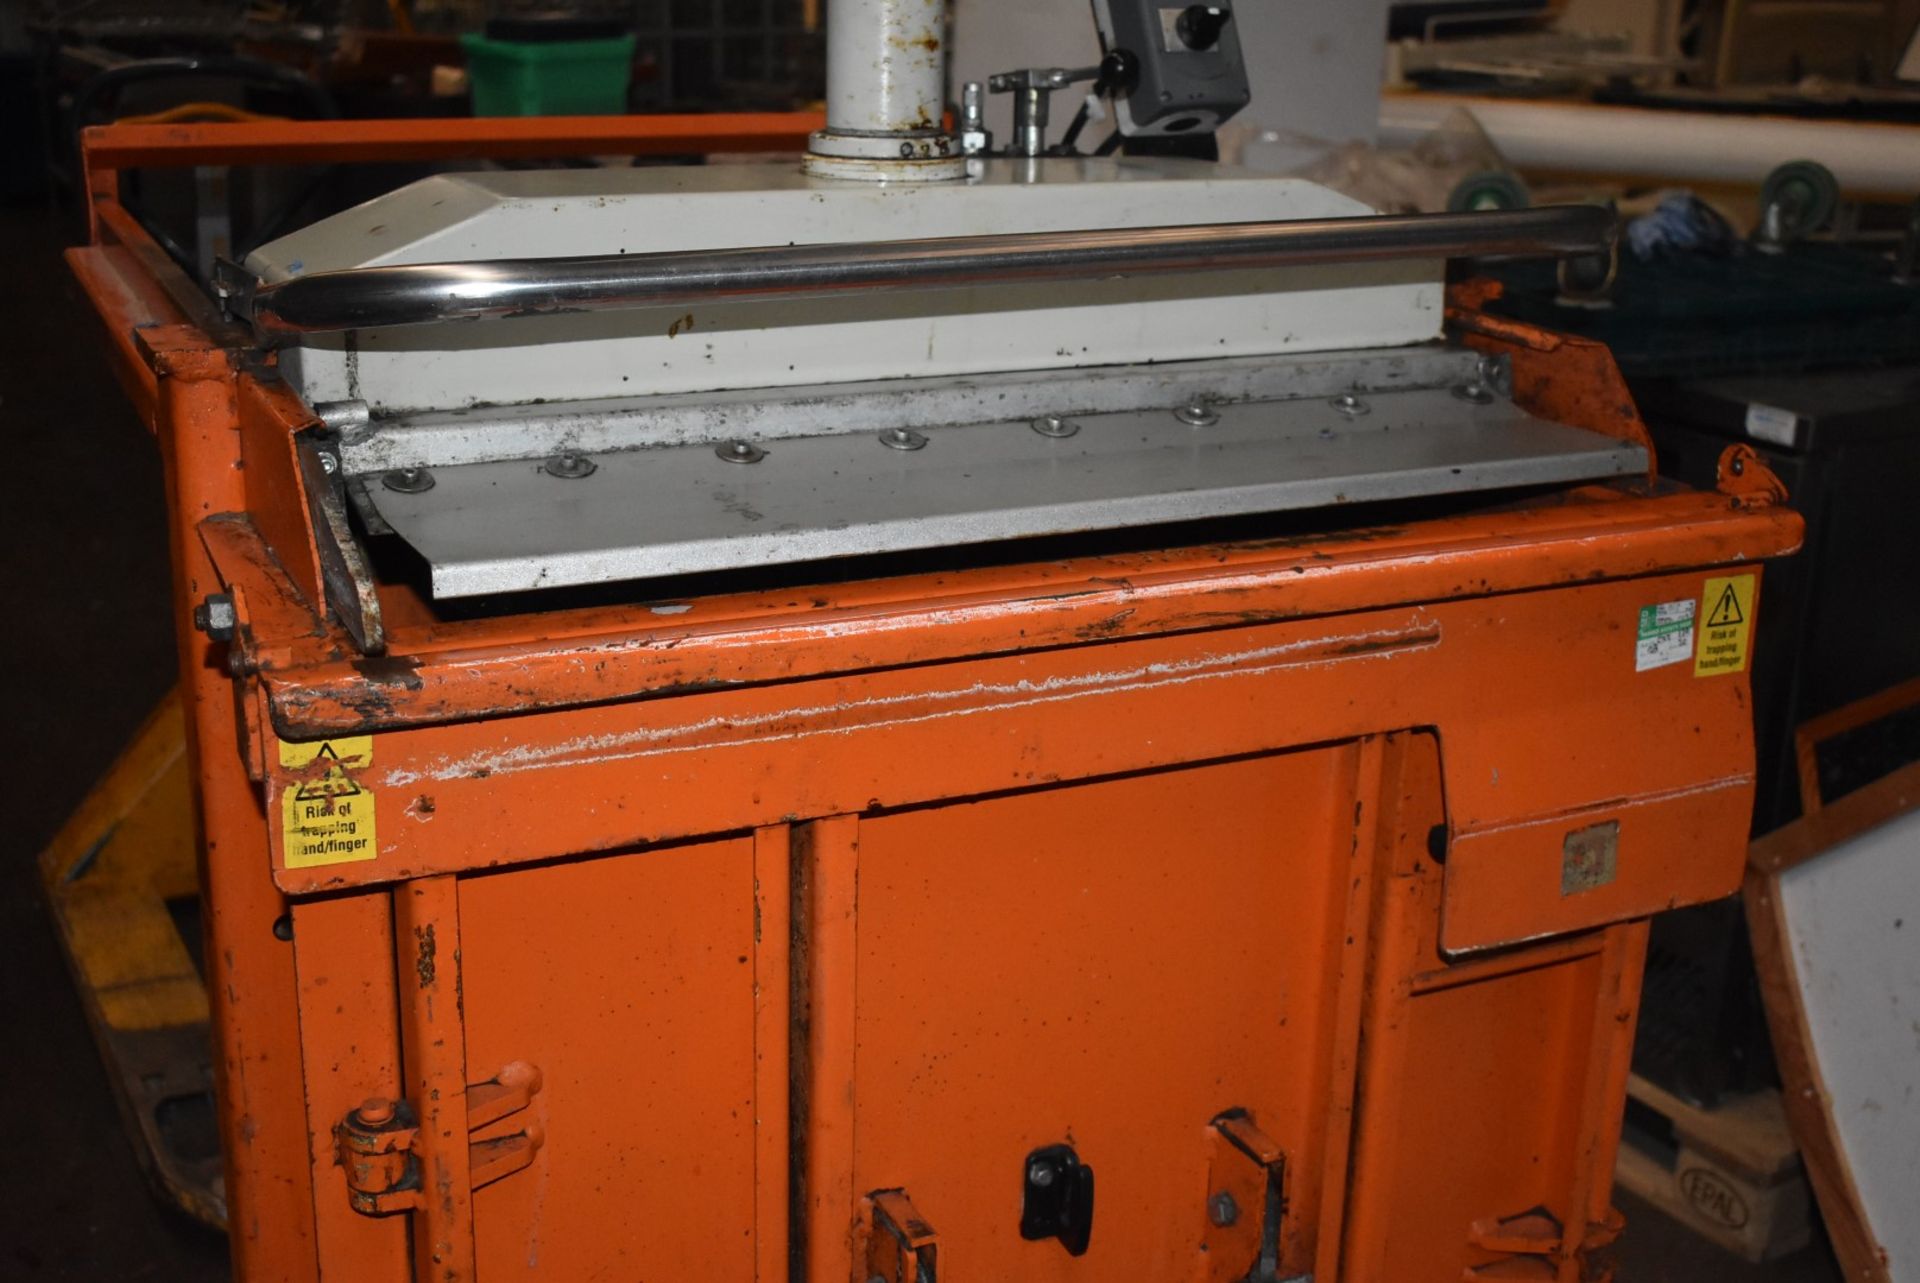 1 x Orwak 5010 Hydraulic Press Compact Cardboard Baler - Used For Compacting Recyclable or Non- - Image 4 of 15